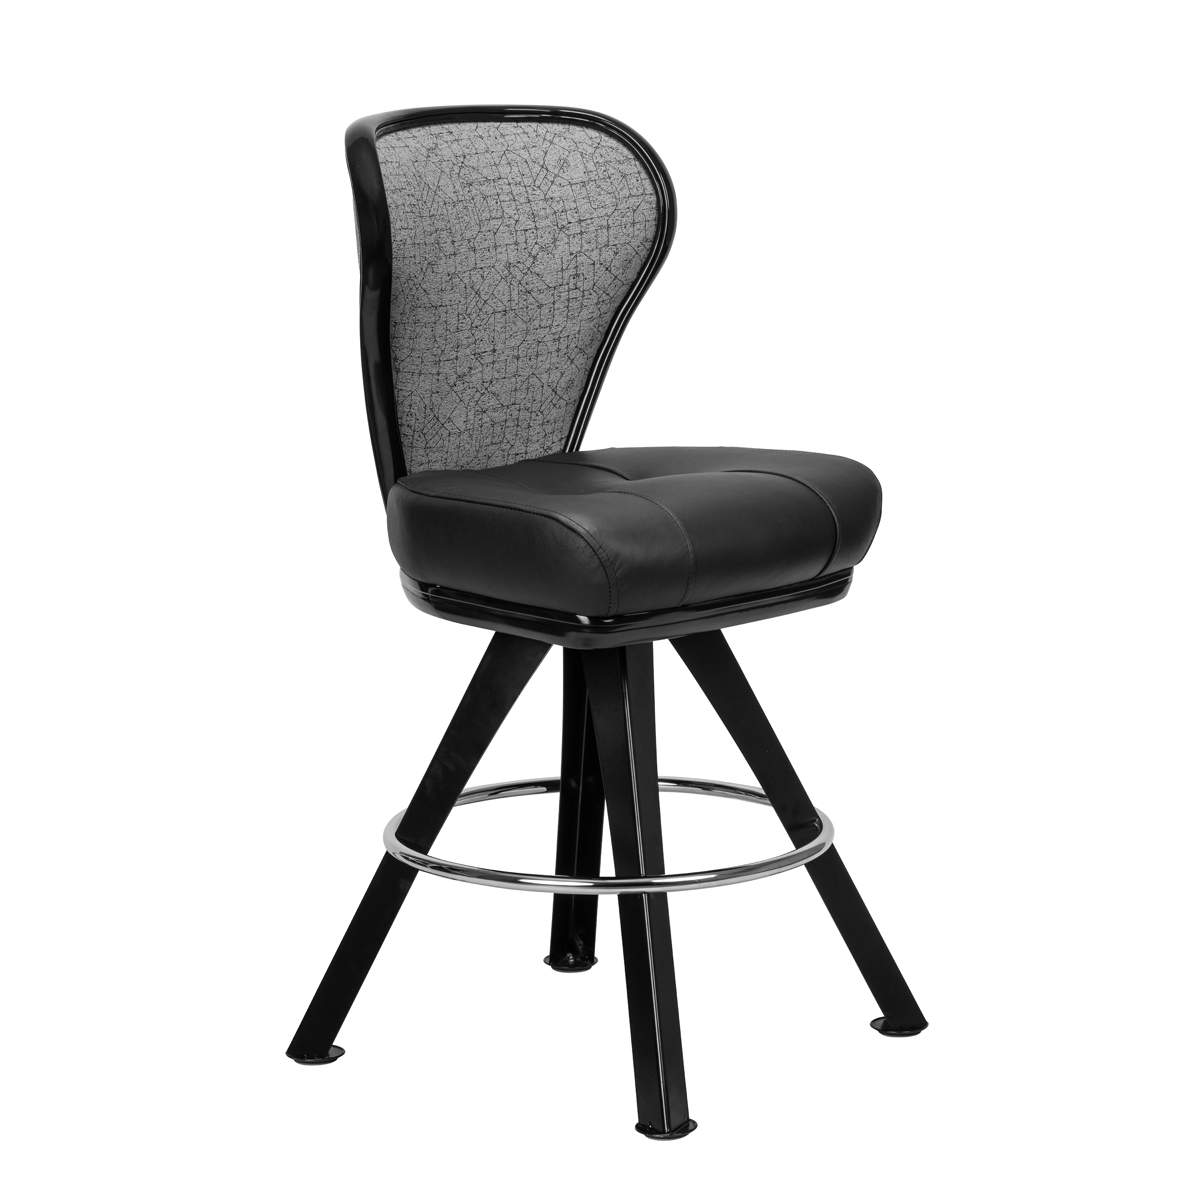 Lunar casino gaming stool is the ideal chair for casino slot machines and table games